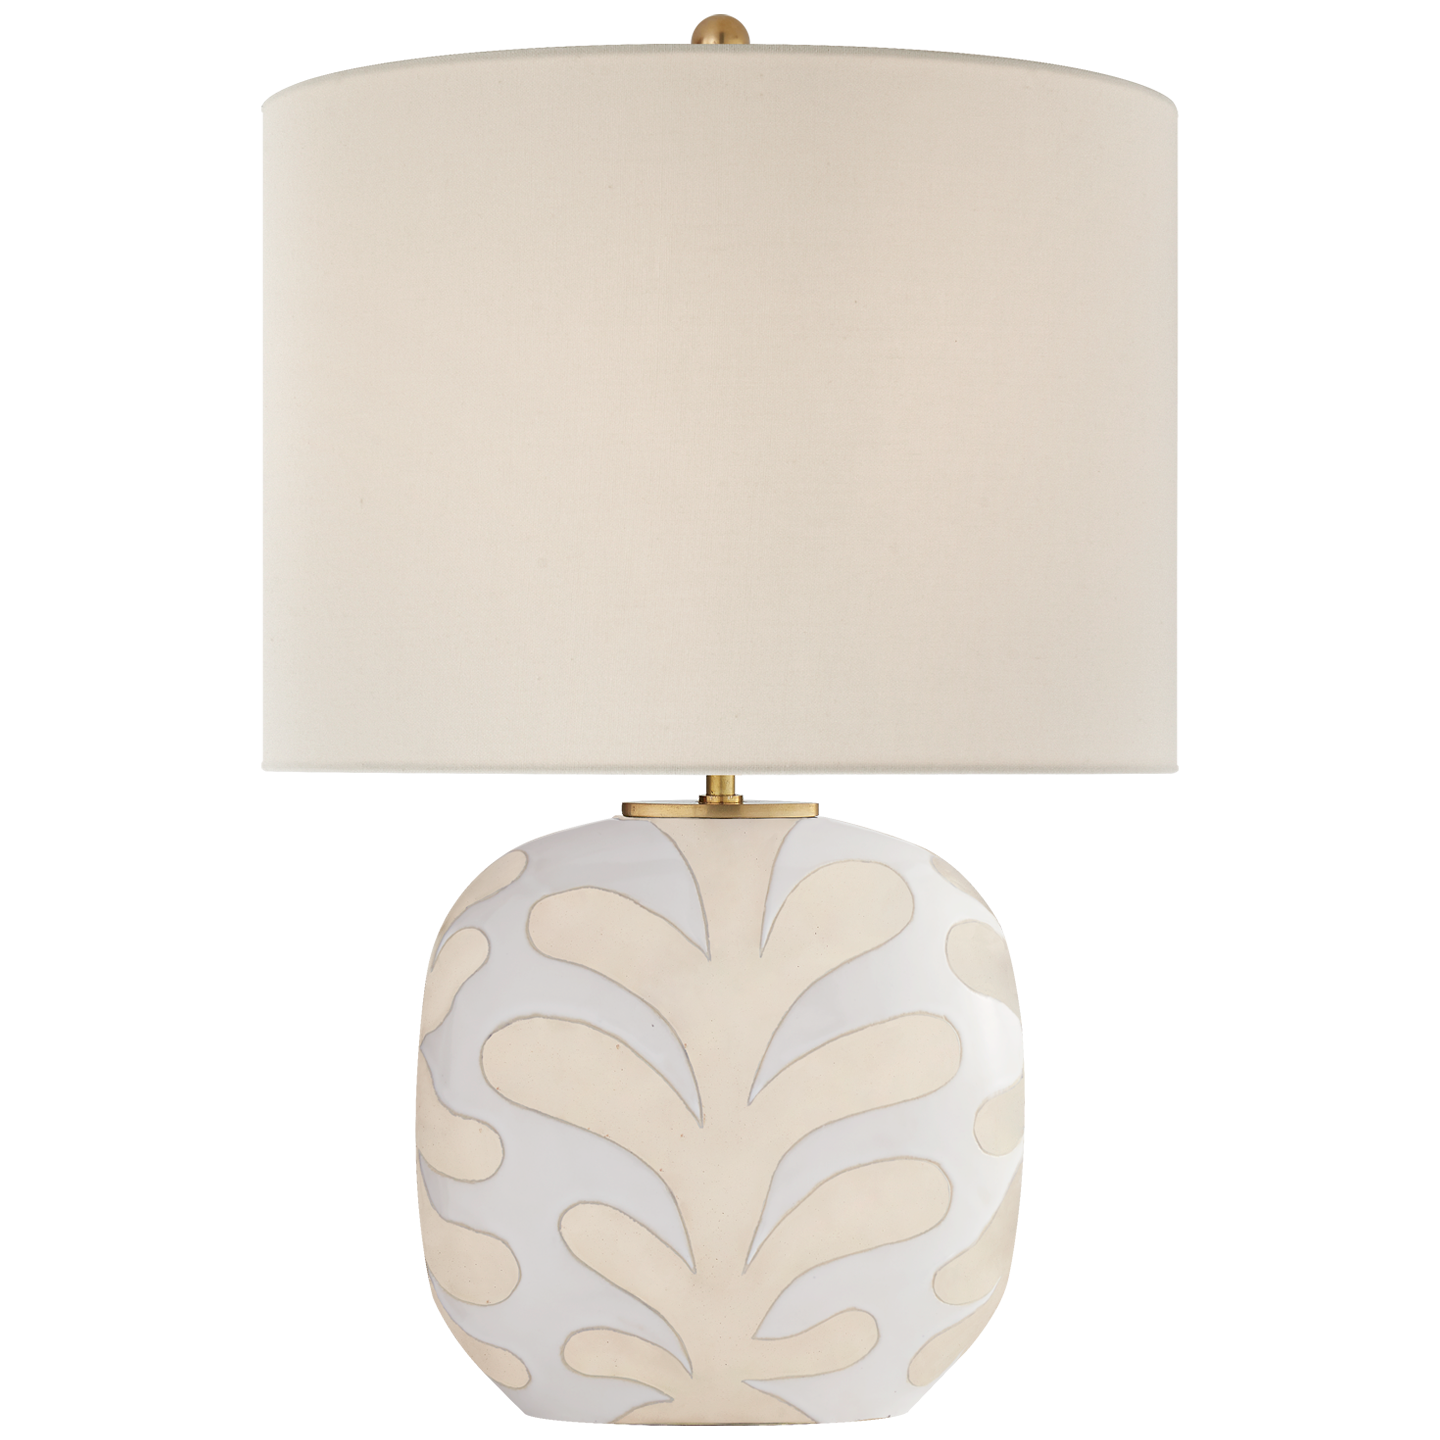 Ladda upp bild till gallerivisning, Parkwood Medium Table Lamp in Natural Bisque and New White with Linen Shade
